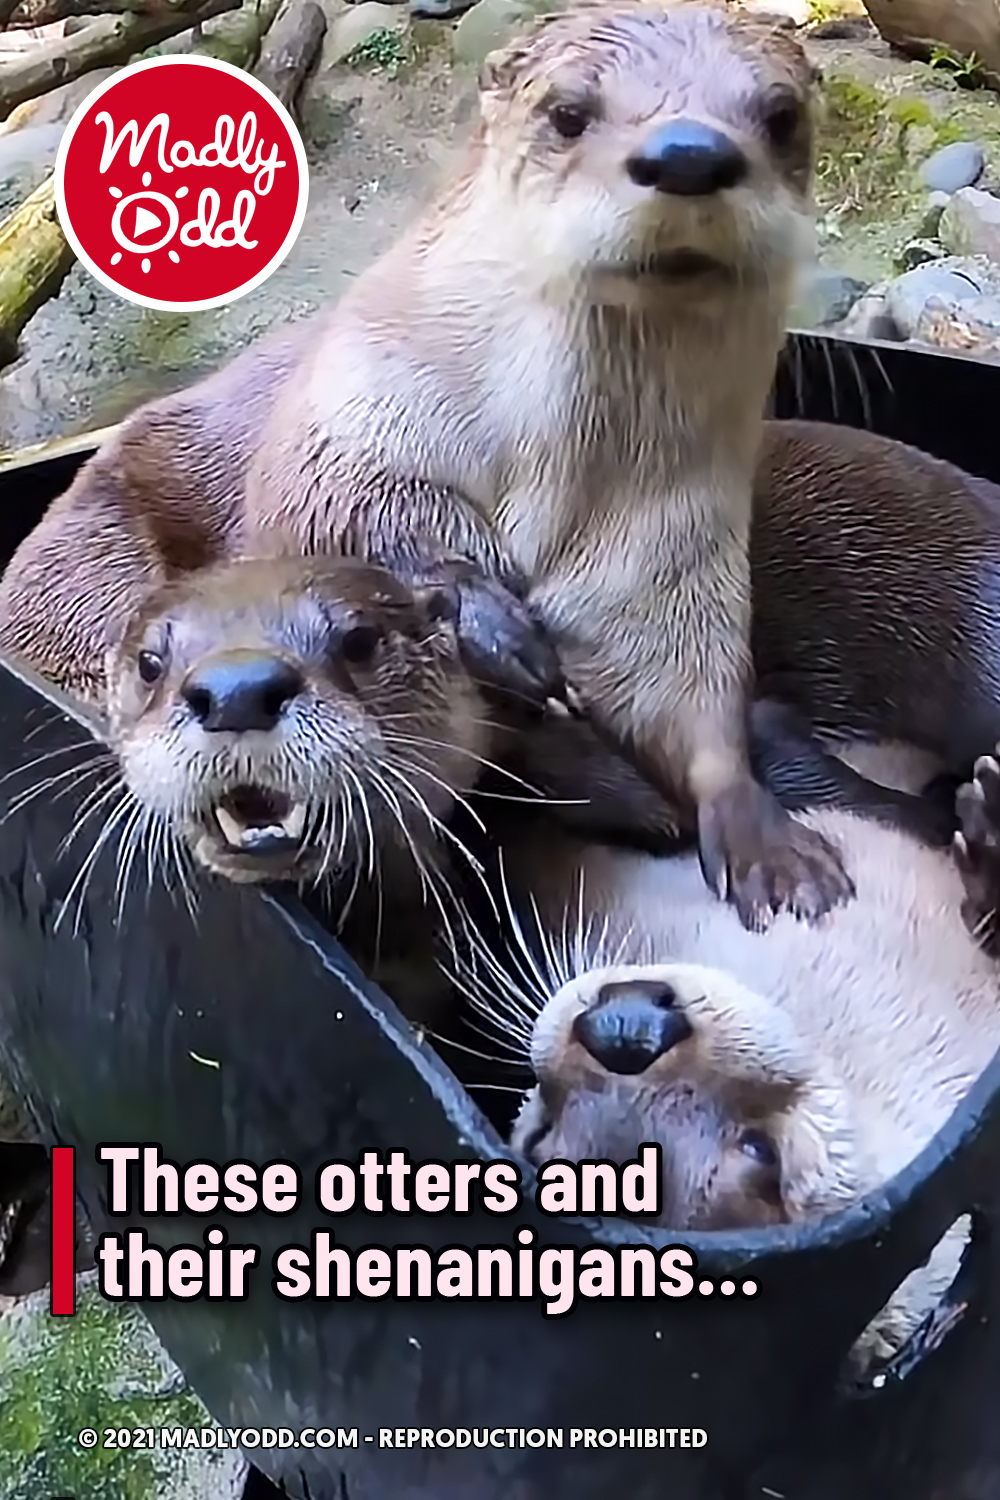 These otters and their shenanigans…